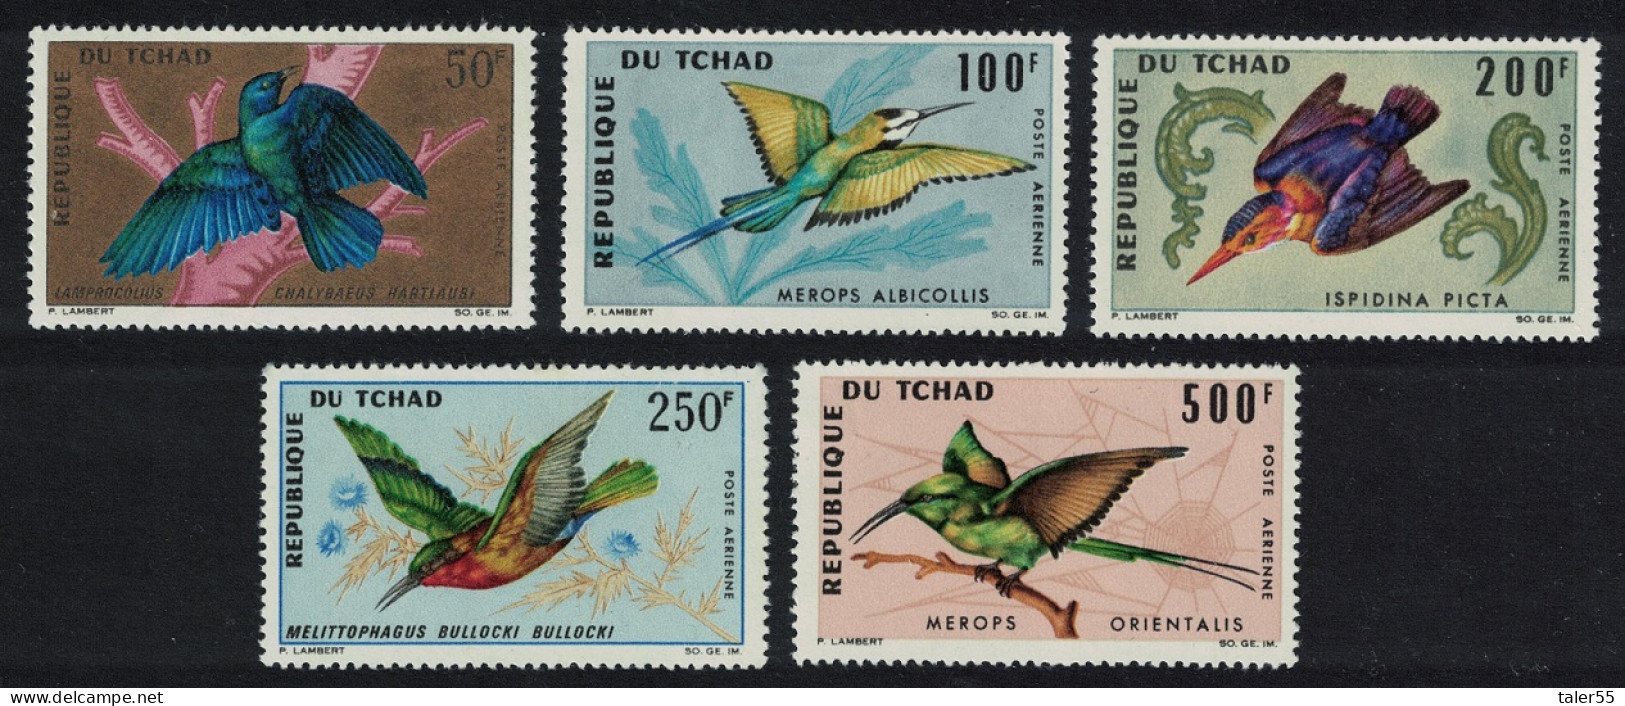 Chad Kingfisher Starling Bee-eater Birds 5v 1966 MNH SG#163-167 - Chad (1960-...)